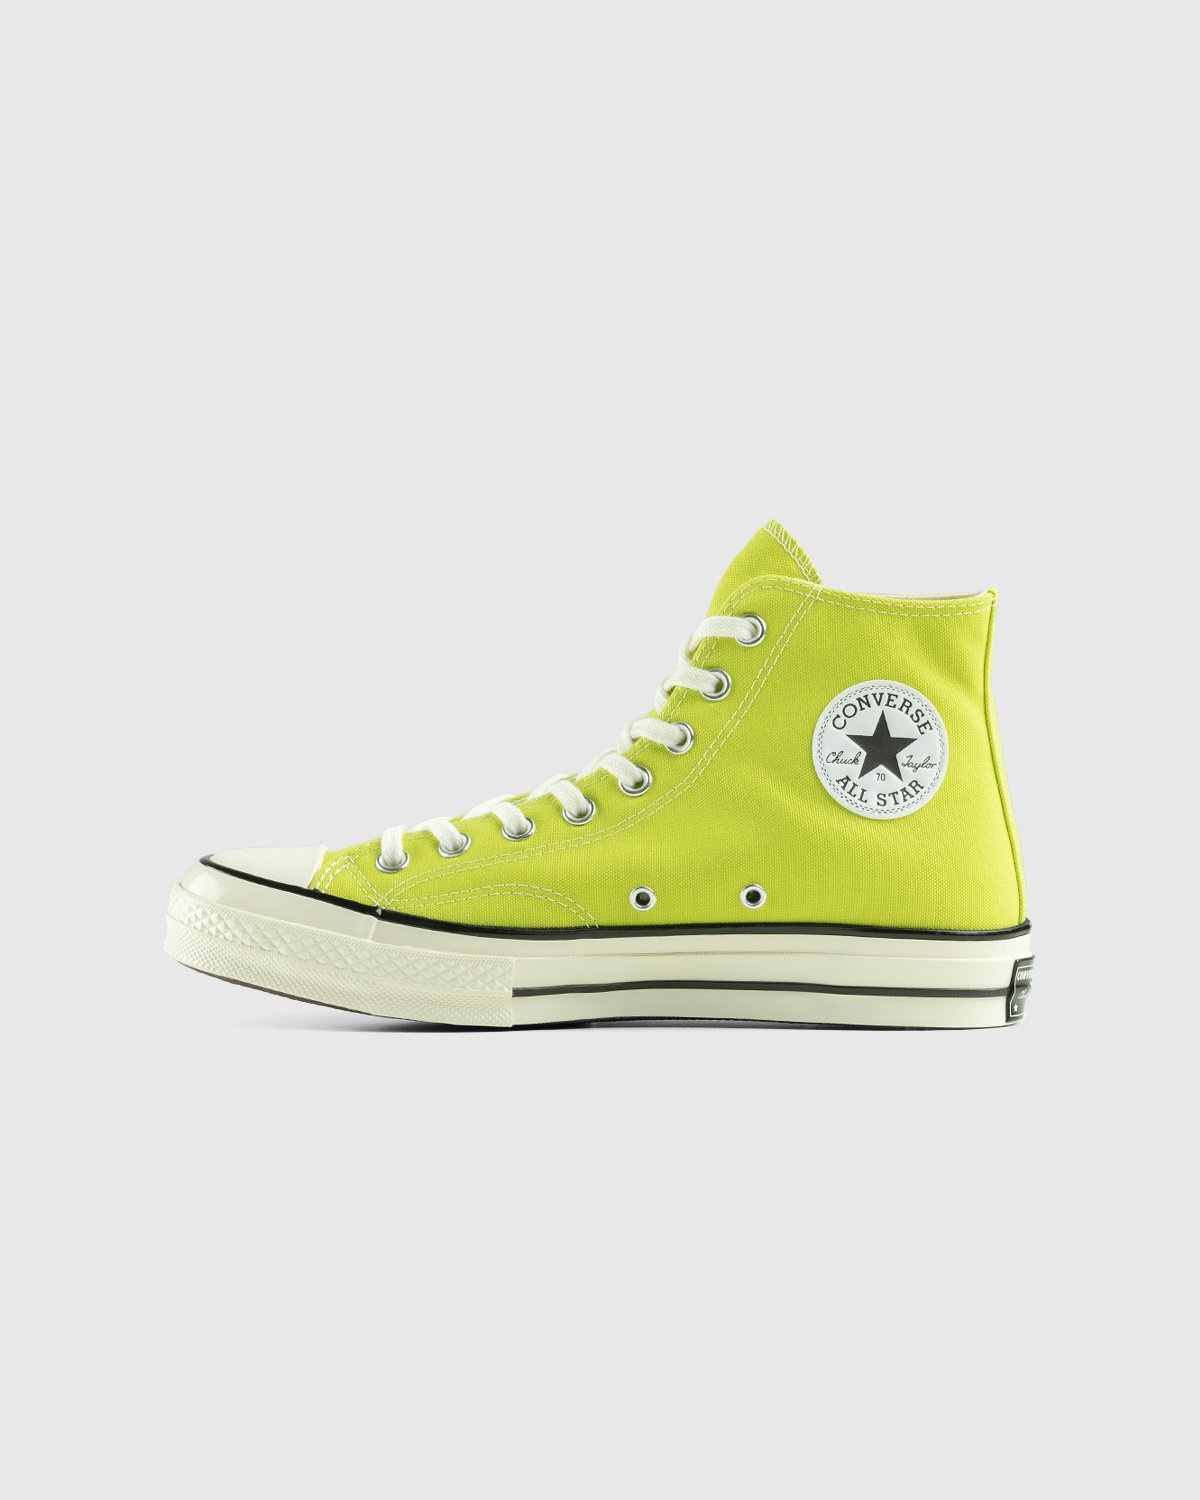 Converse – Chuck 70 Lime Twist Egret Black - Sneakers - Yellow - Image 2